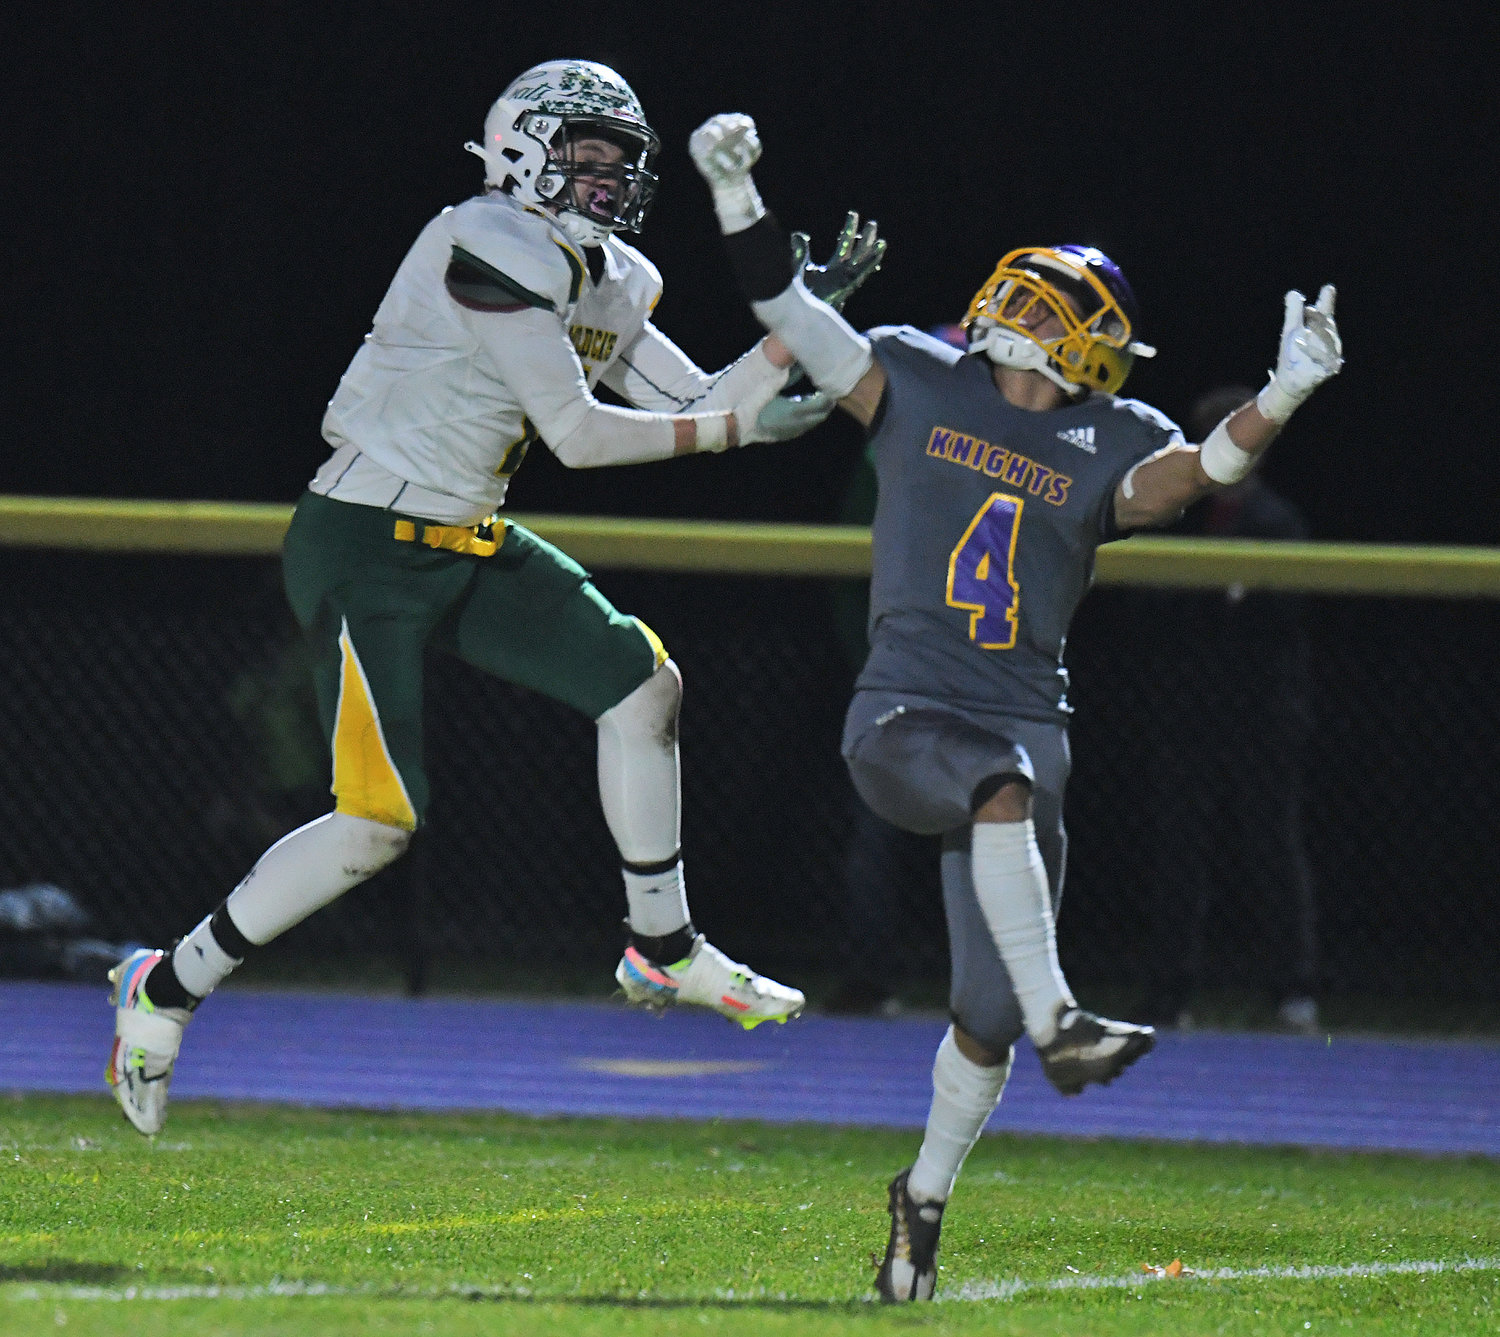 Holland Patent defensive back Anthony Phan tips a pass intended for Adirondack receiver Evan Williams. Phan intercepted the ball as he hit the ground near the goal line to end an Adirondack drive late in the first half. The Wildcats won 46-0 on the road Saturday.